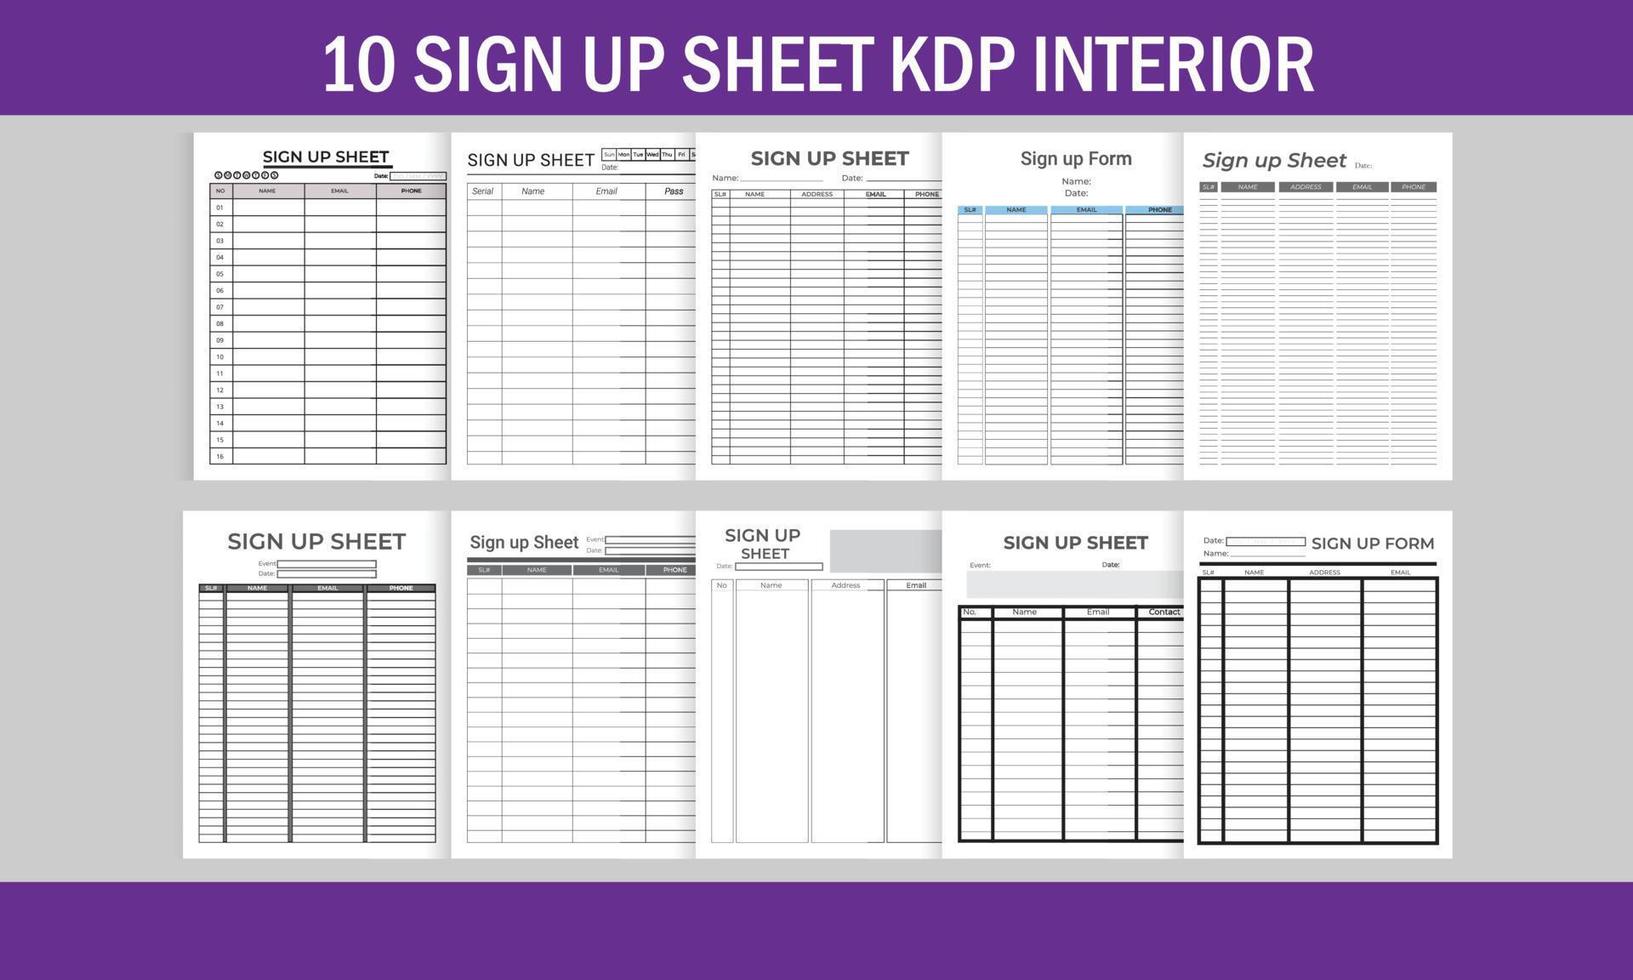 10 Editable Canva Templates Sign Up Sheet for KDP Sign Up Sheet for KDP Interior 10 Different Style and Unique Sign Up Sheet vector